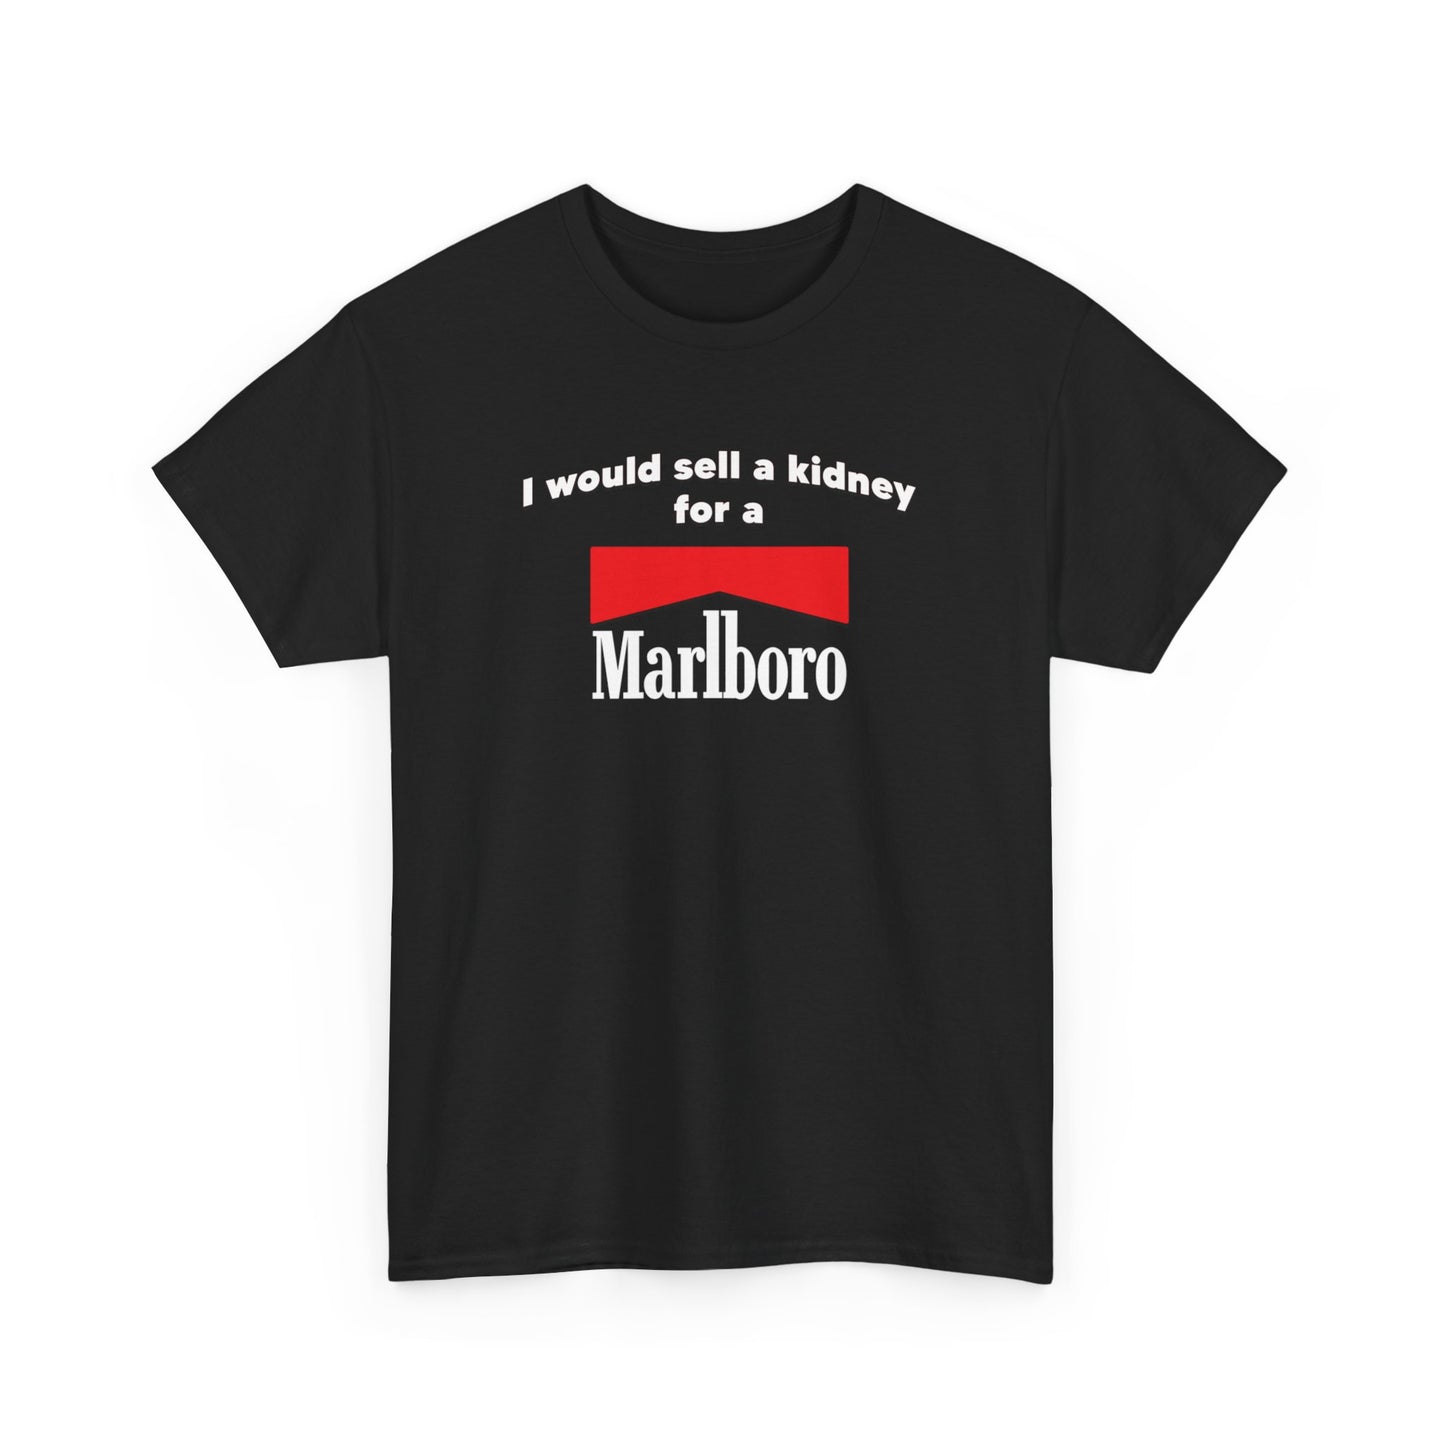 I WOULD SELL MY KIDNEY FOR A MARLBORO T-SHIRT